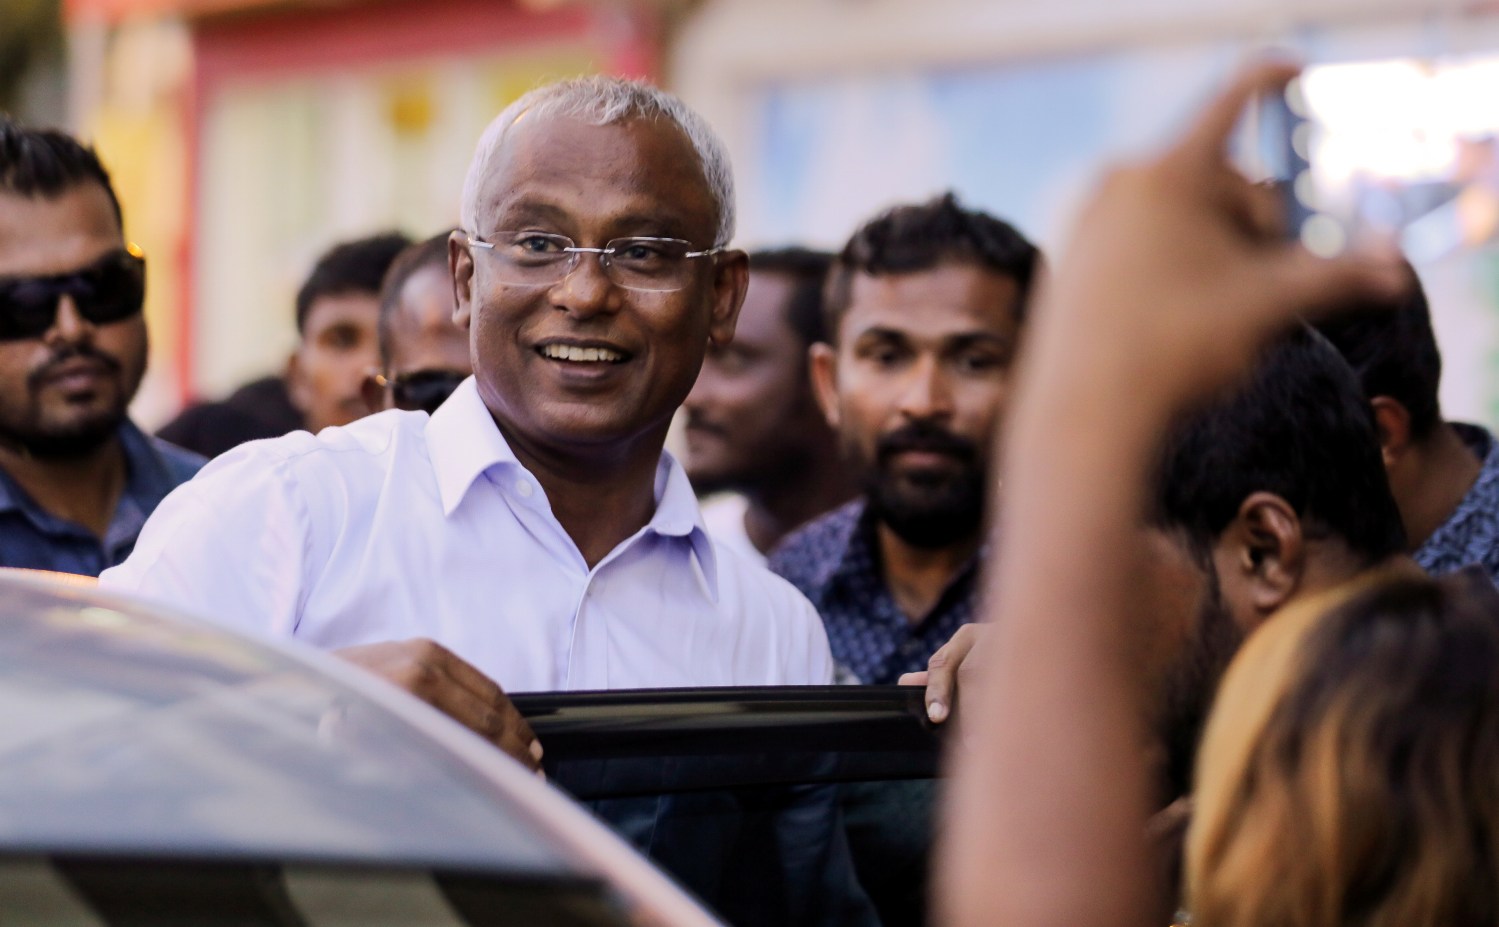 Maldivian president-elect Ibrahim Mohamed Solih arrives at an event with supporters in Male, Maldives September 24, 2018. REUTERS/Ashwa Faheem - RC1CD9218330